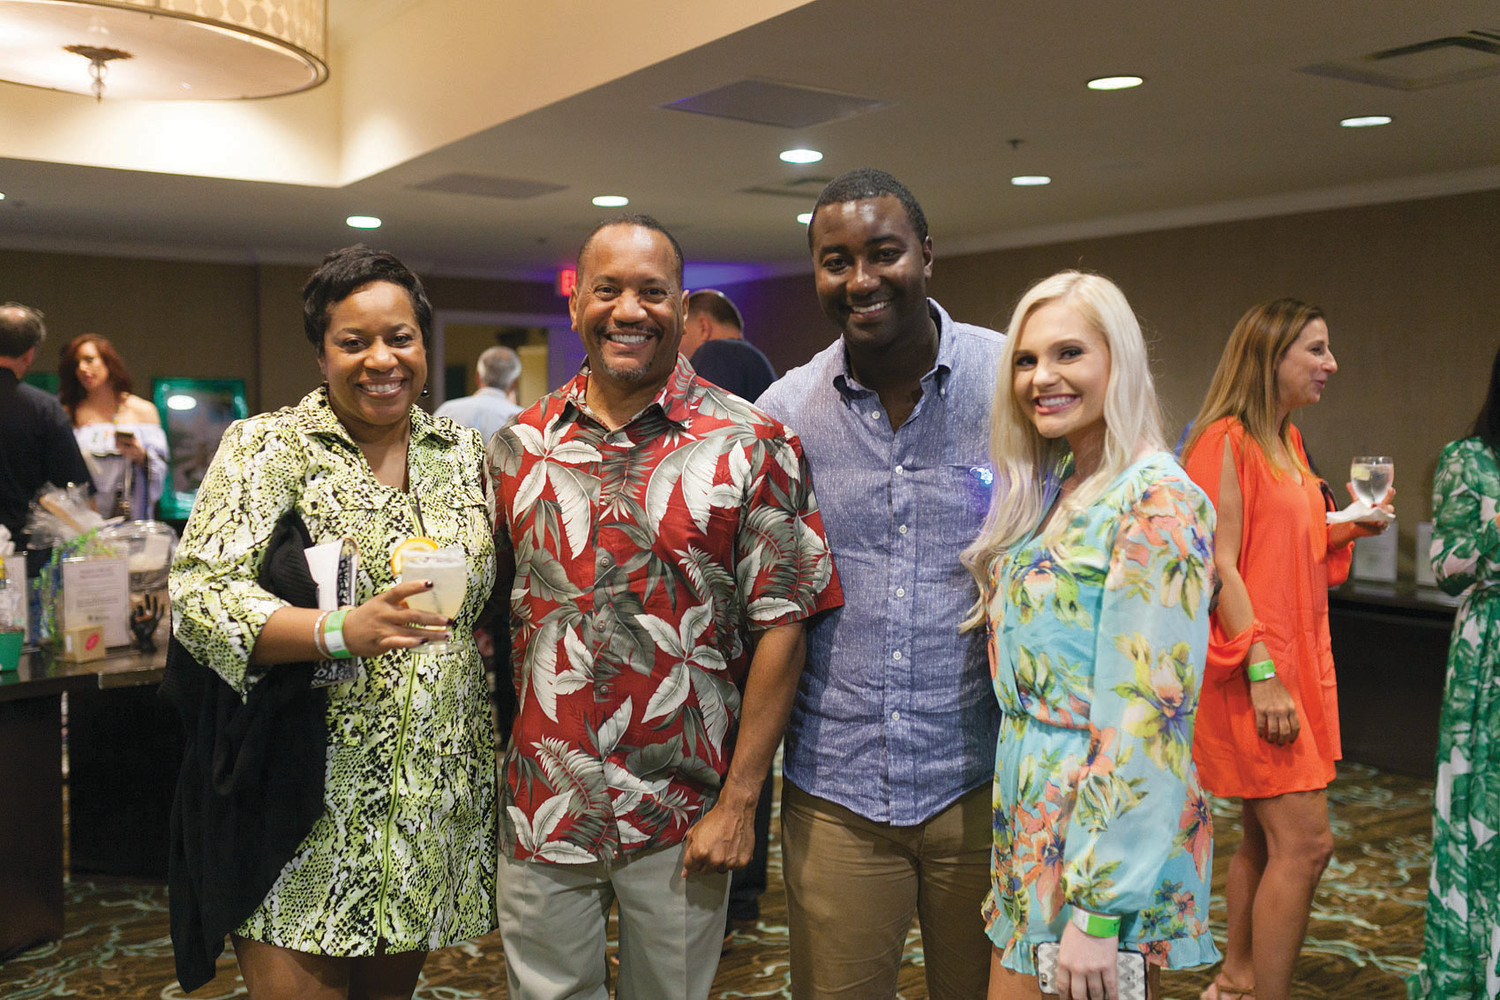 Guests embrace the tropical theme of Margarita J'Ville.